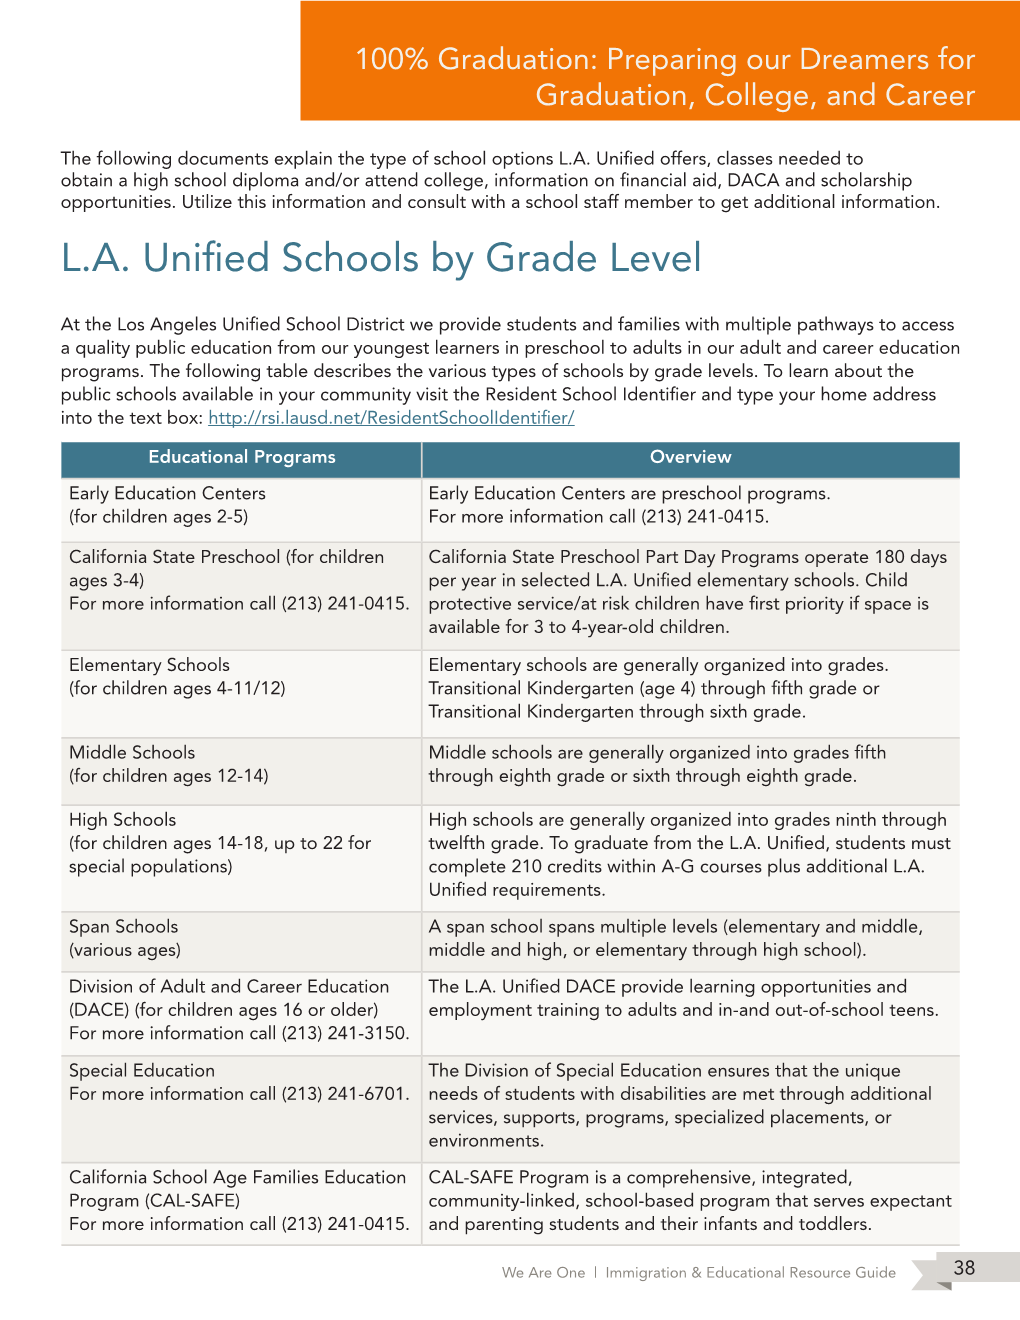 L.A. Unified Schools by Grade Level